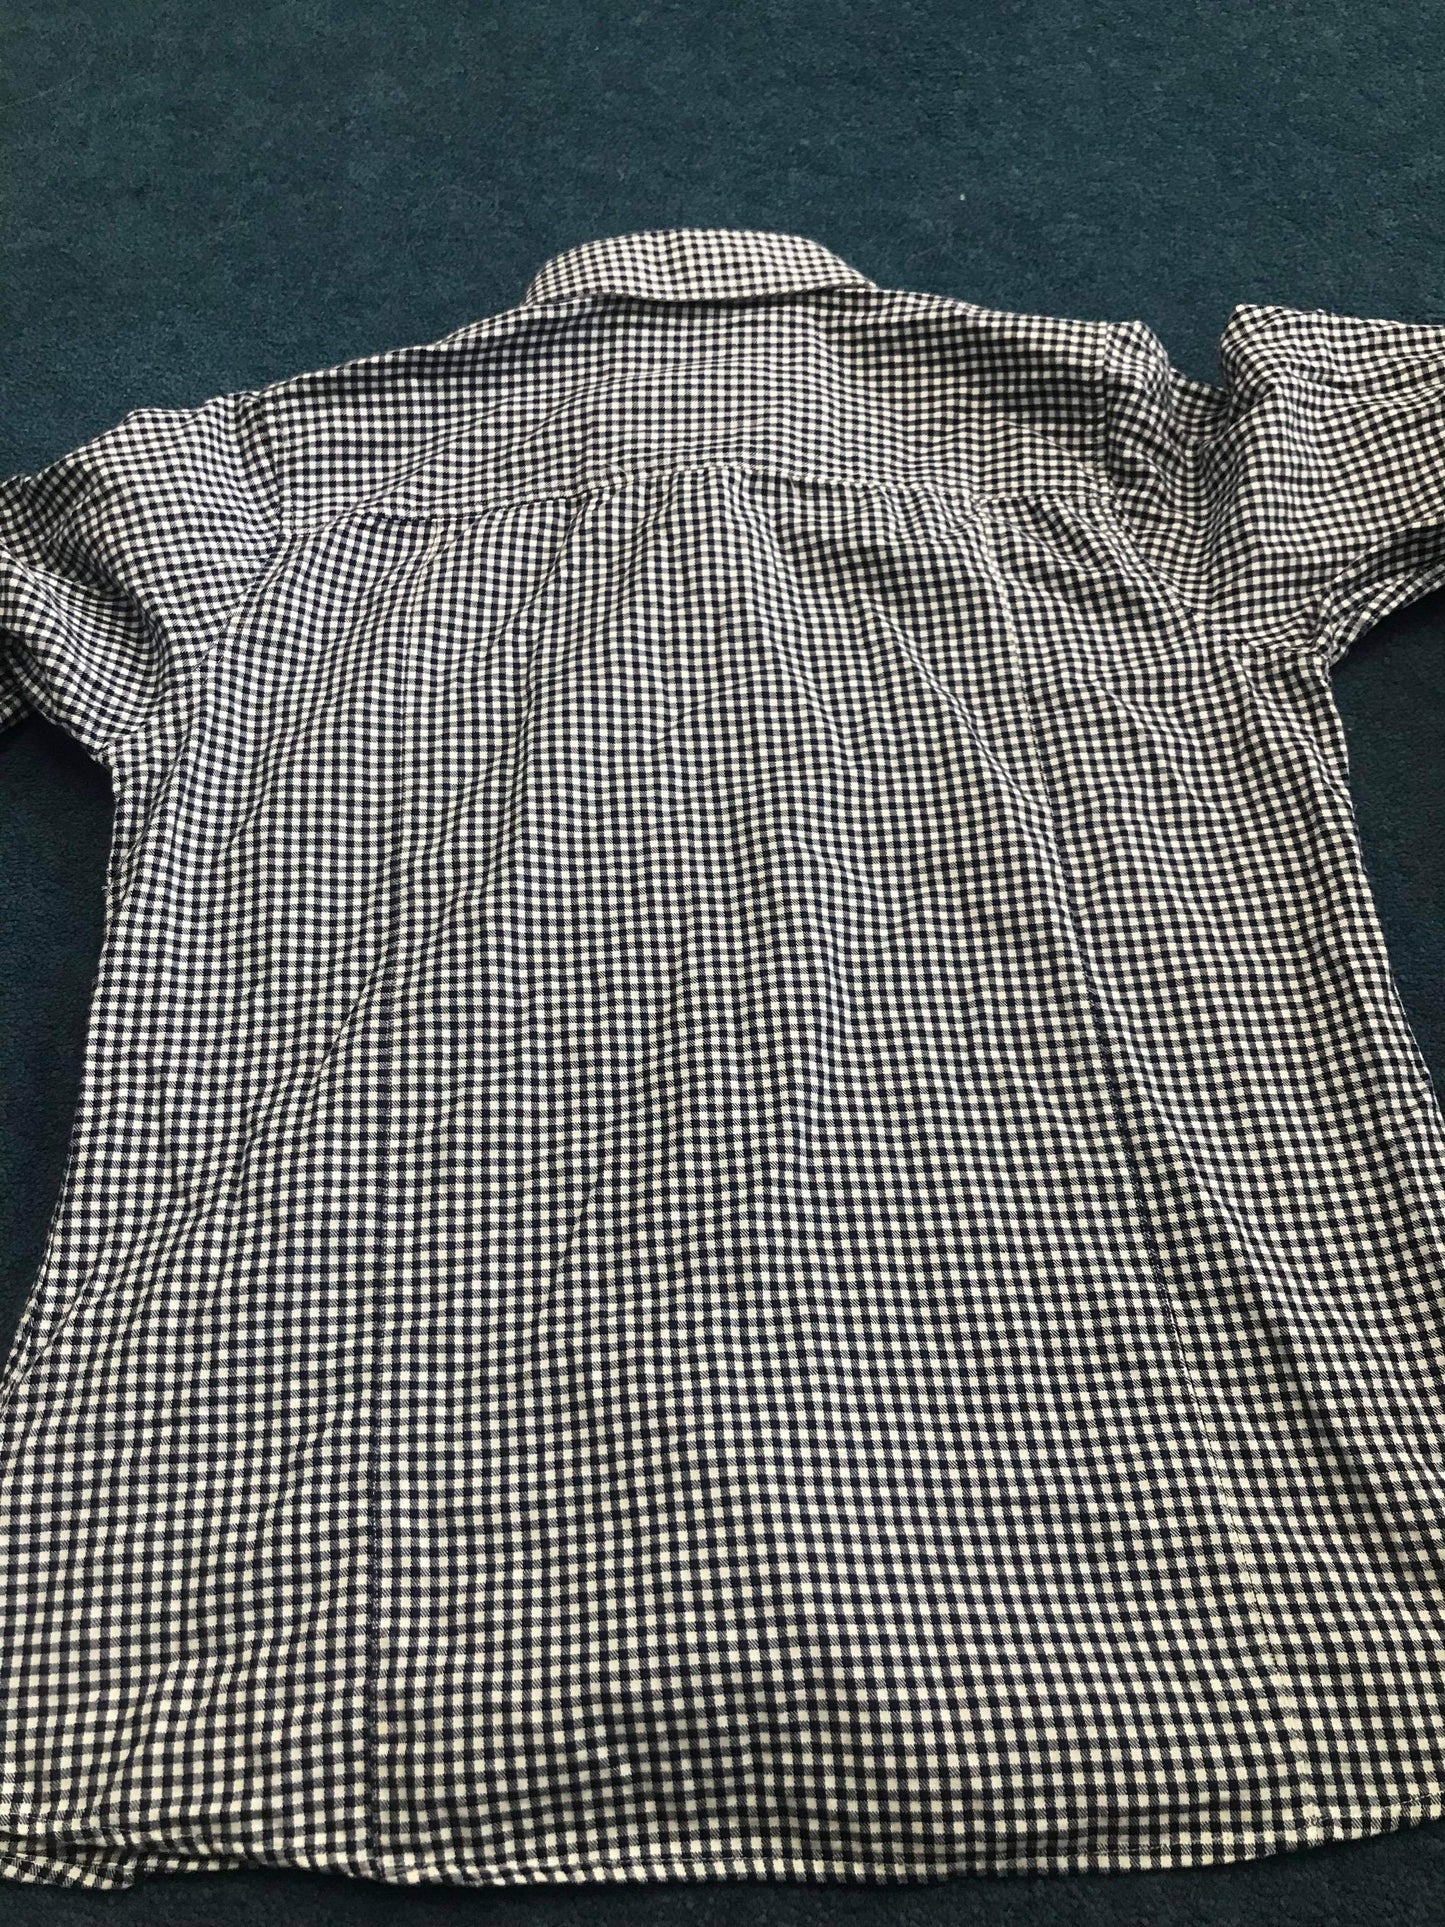 Rydale checked cotton shirt size 16 FREE POSTAGE❤️